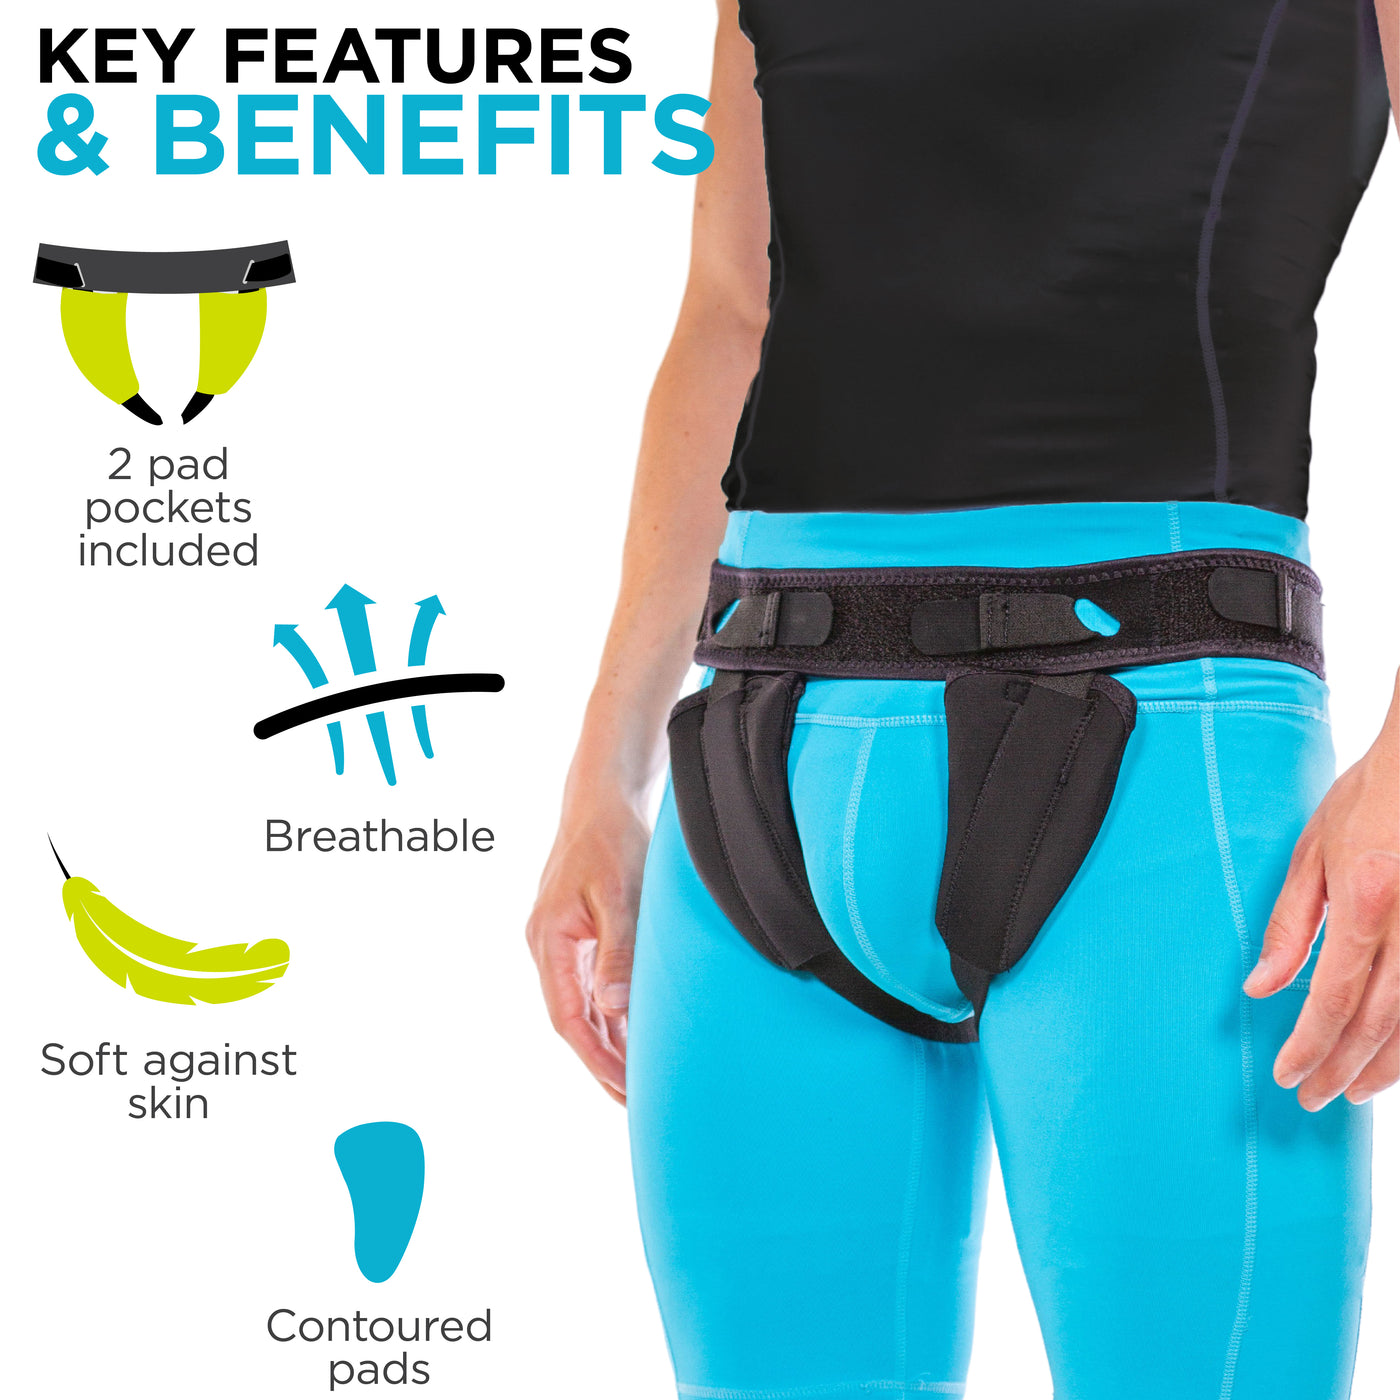 The BraceAbility Inguinal Hernia Belt is made with a breathable, comfortable material for all day hernia protection